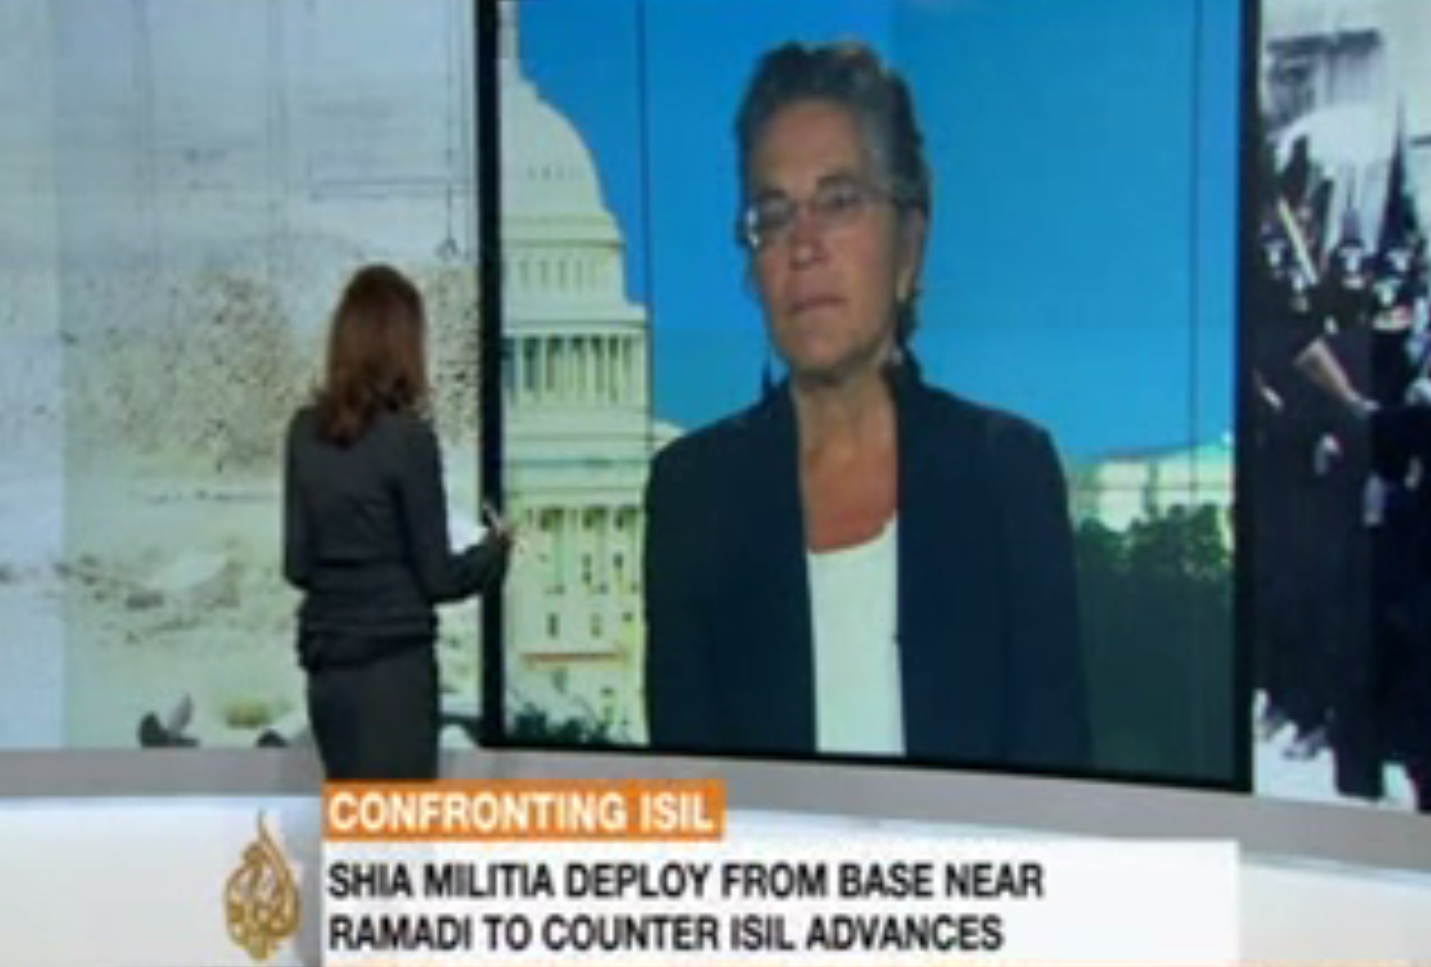 Increased Militarization in Iraq Will Contribute to ISIS Problem